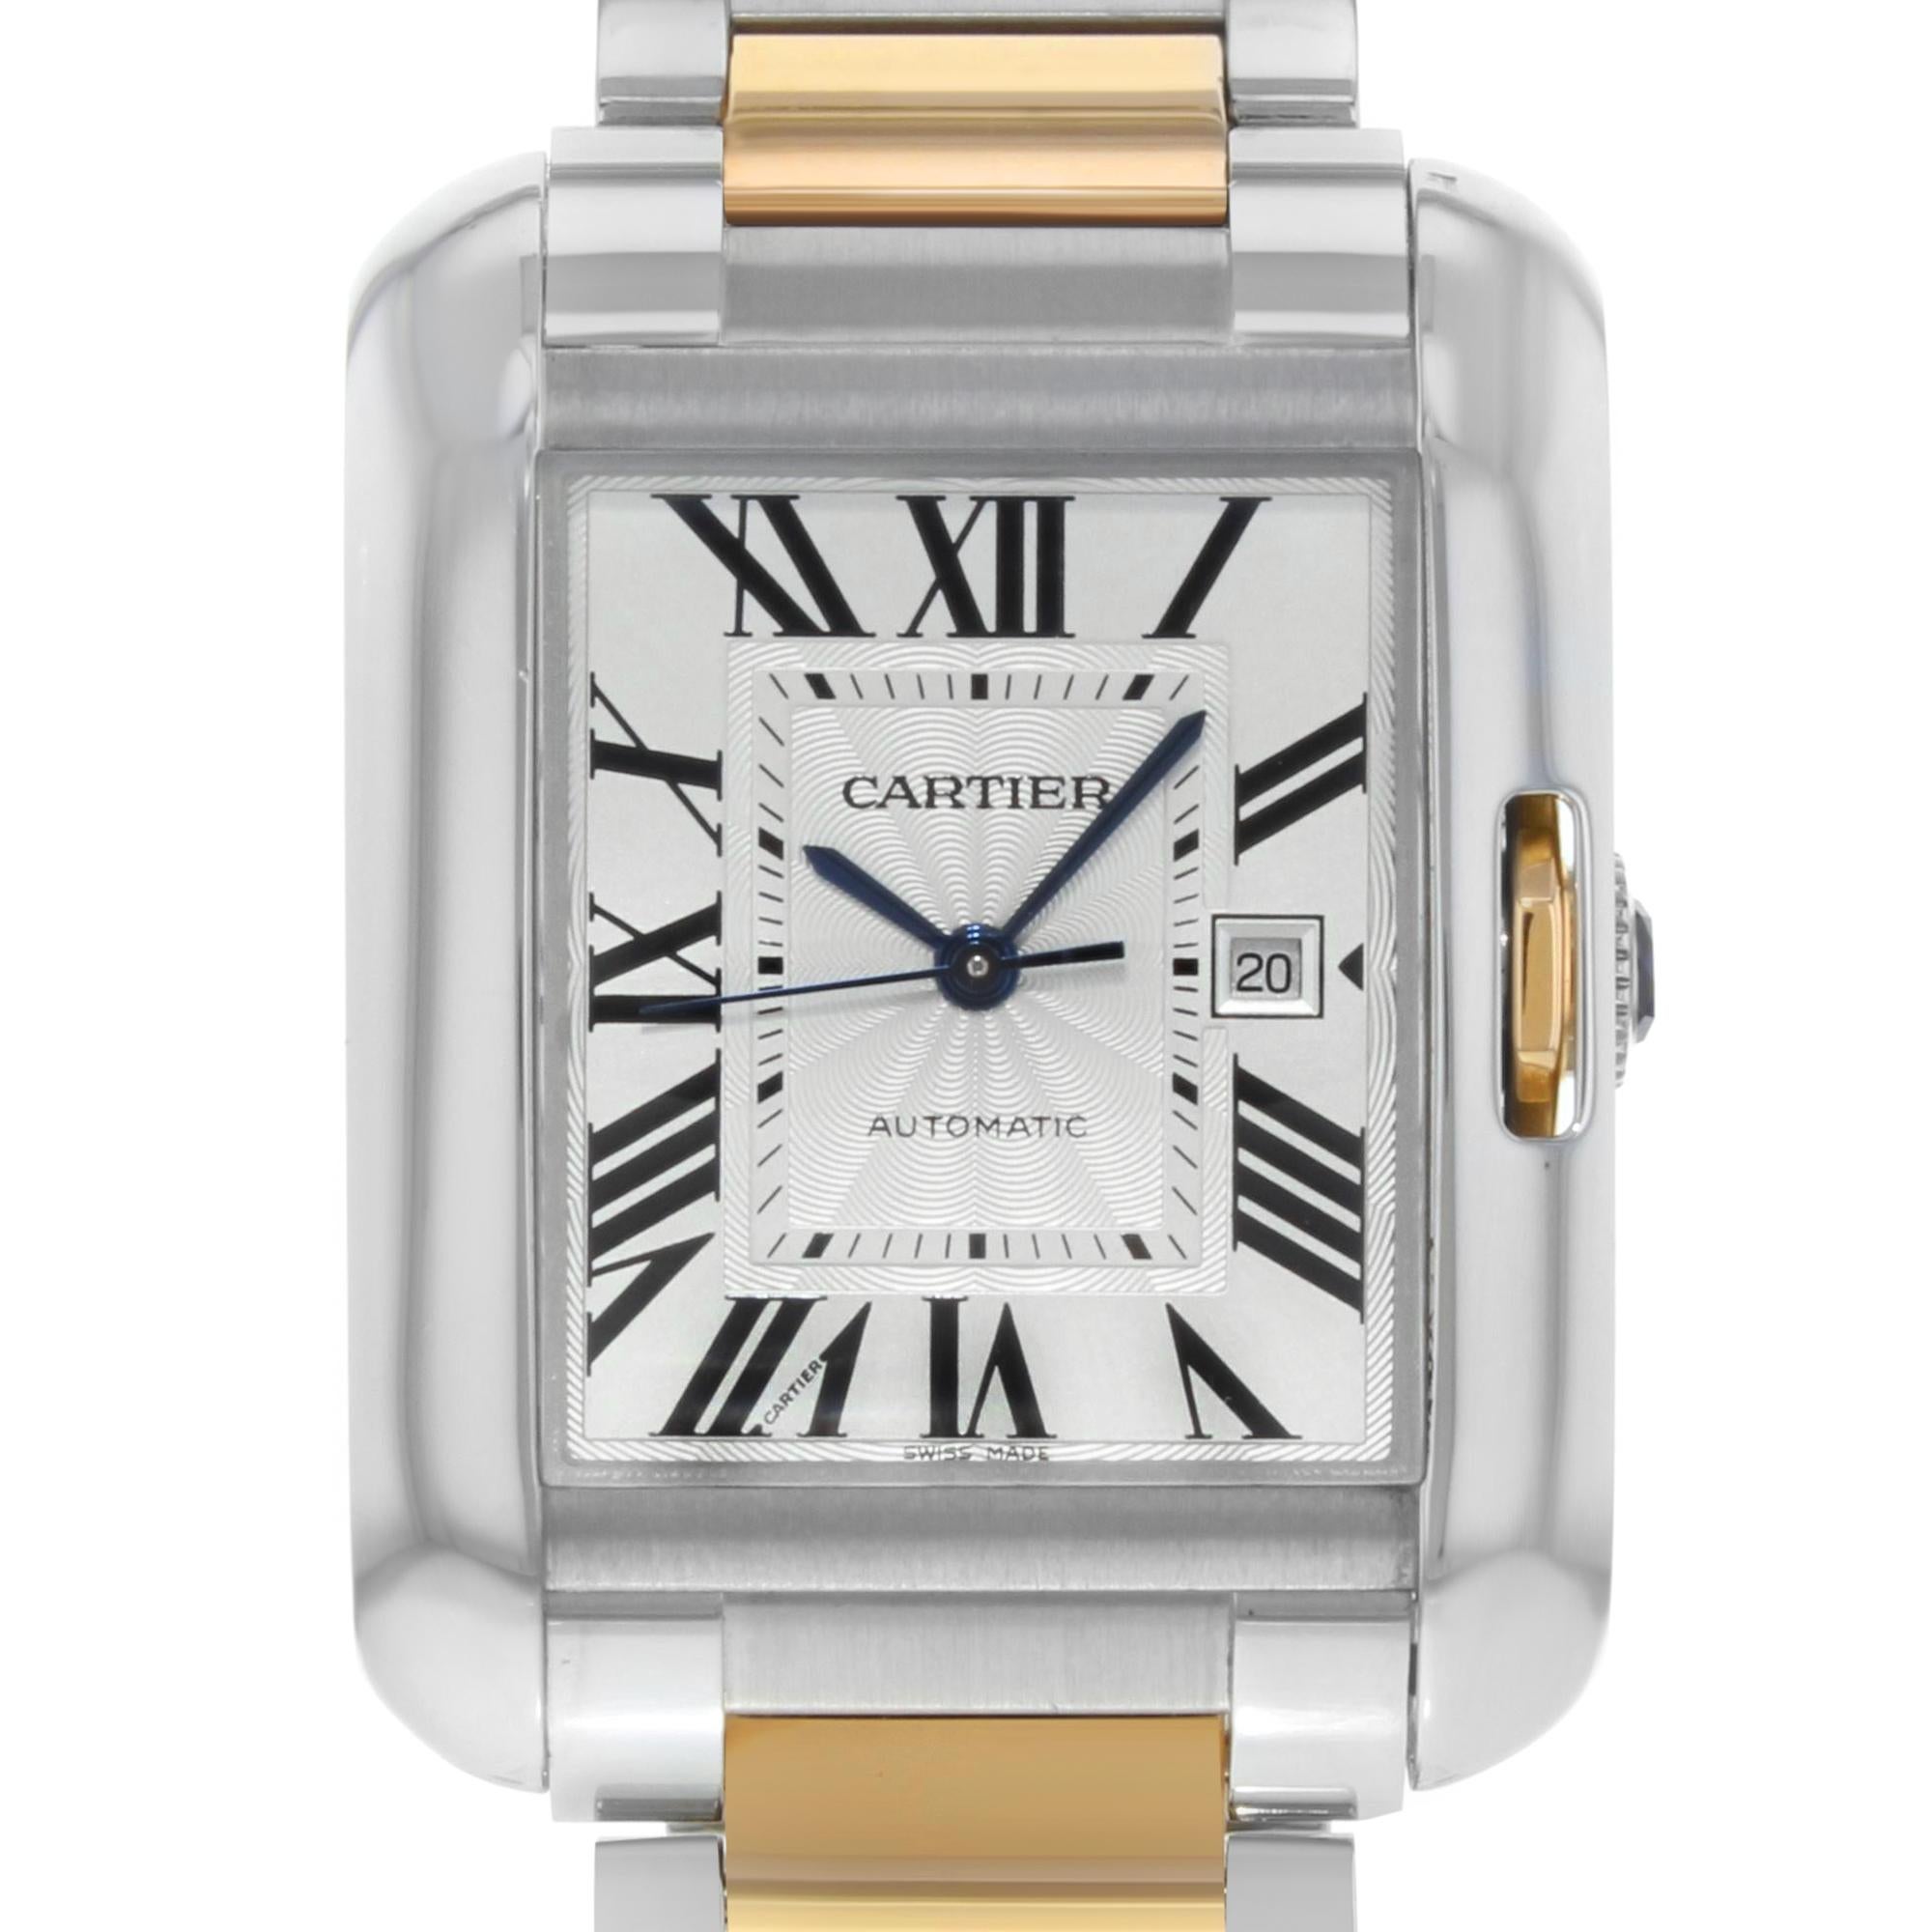 This watch is in mint preowned condition and comes with manufacturers box and papers. Backed by a 1 year Chronostore warranty
Details:
MSRP 9100
Model Number W5310007
Brand Cartier
Department Unisex
Style Dress/Formal, Luxury
Model Cartier Love
Band